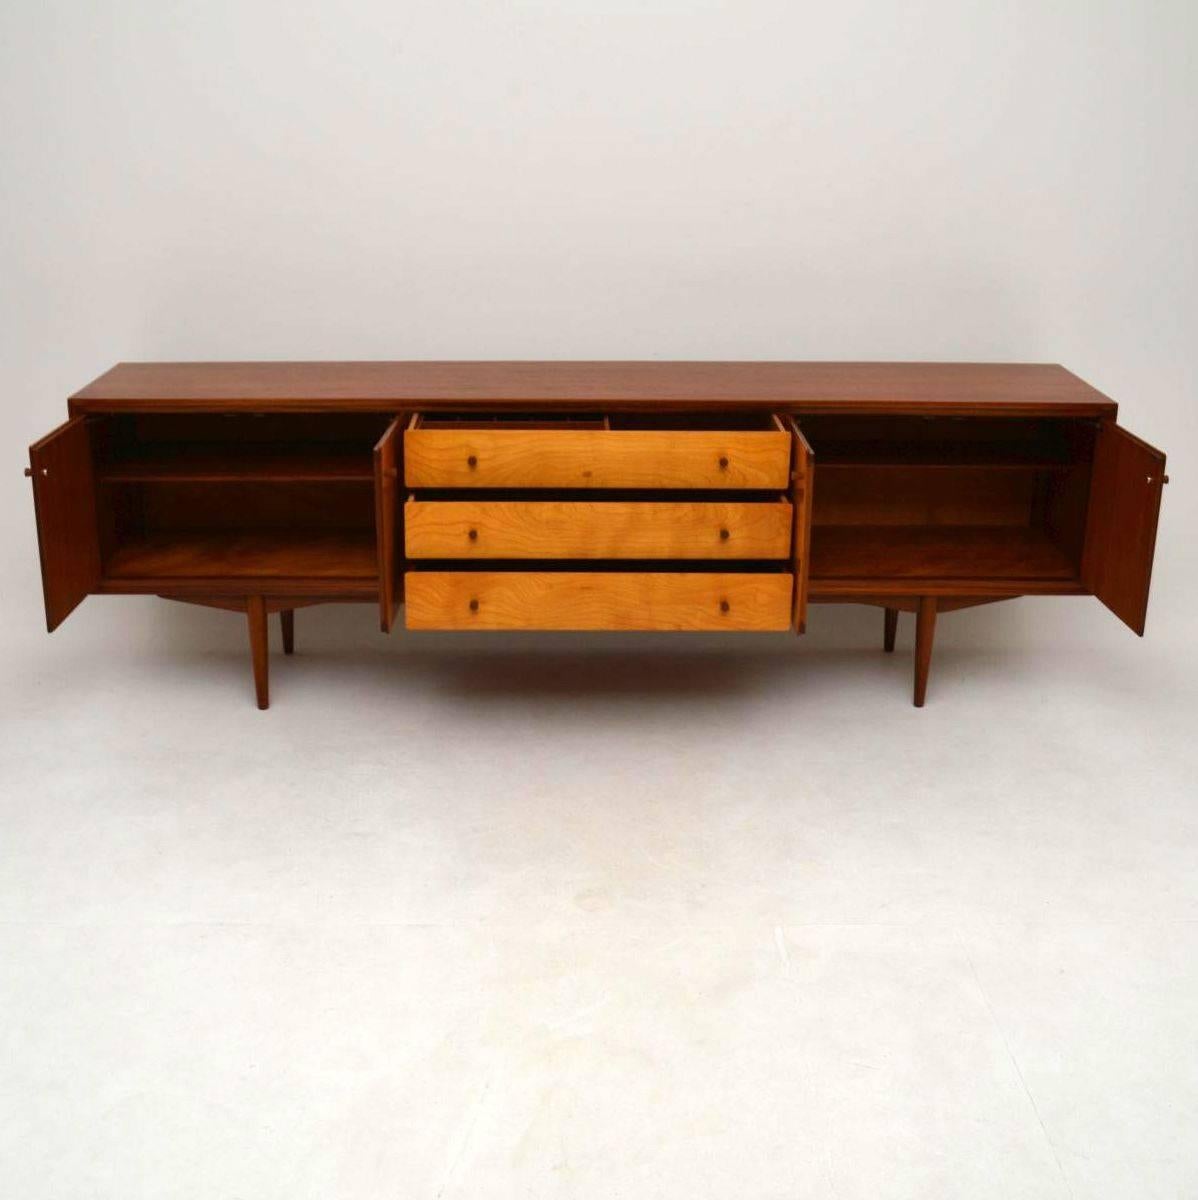 A beautiful and elegant vintage sideboard, this dates from the 1960s. It is of superb quality, it has a Teak carcass and satin wood front. We have had this fully stripped and re-polished to a very high standard, the condition is excellent